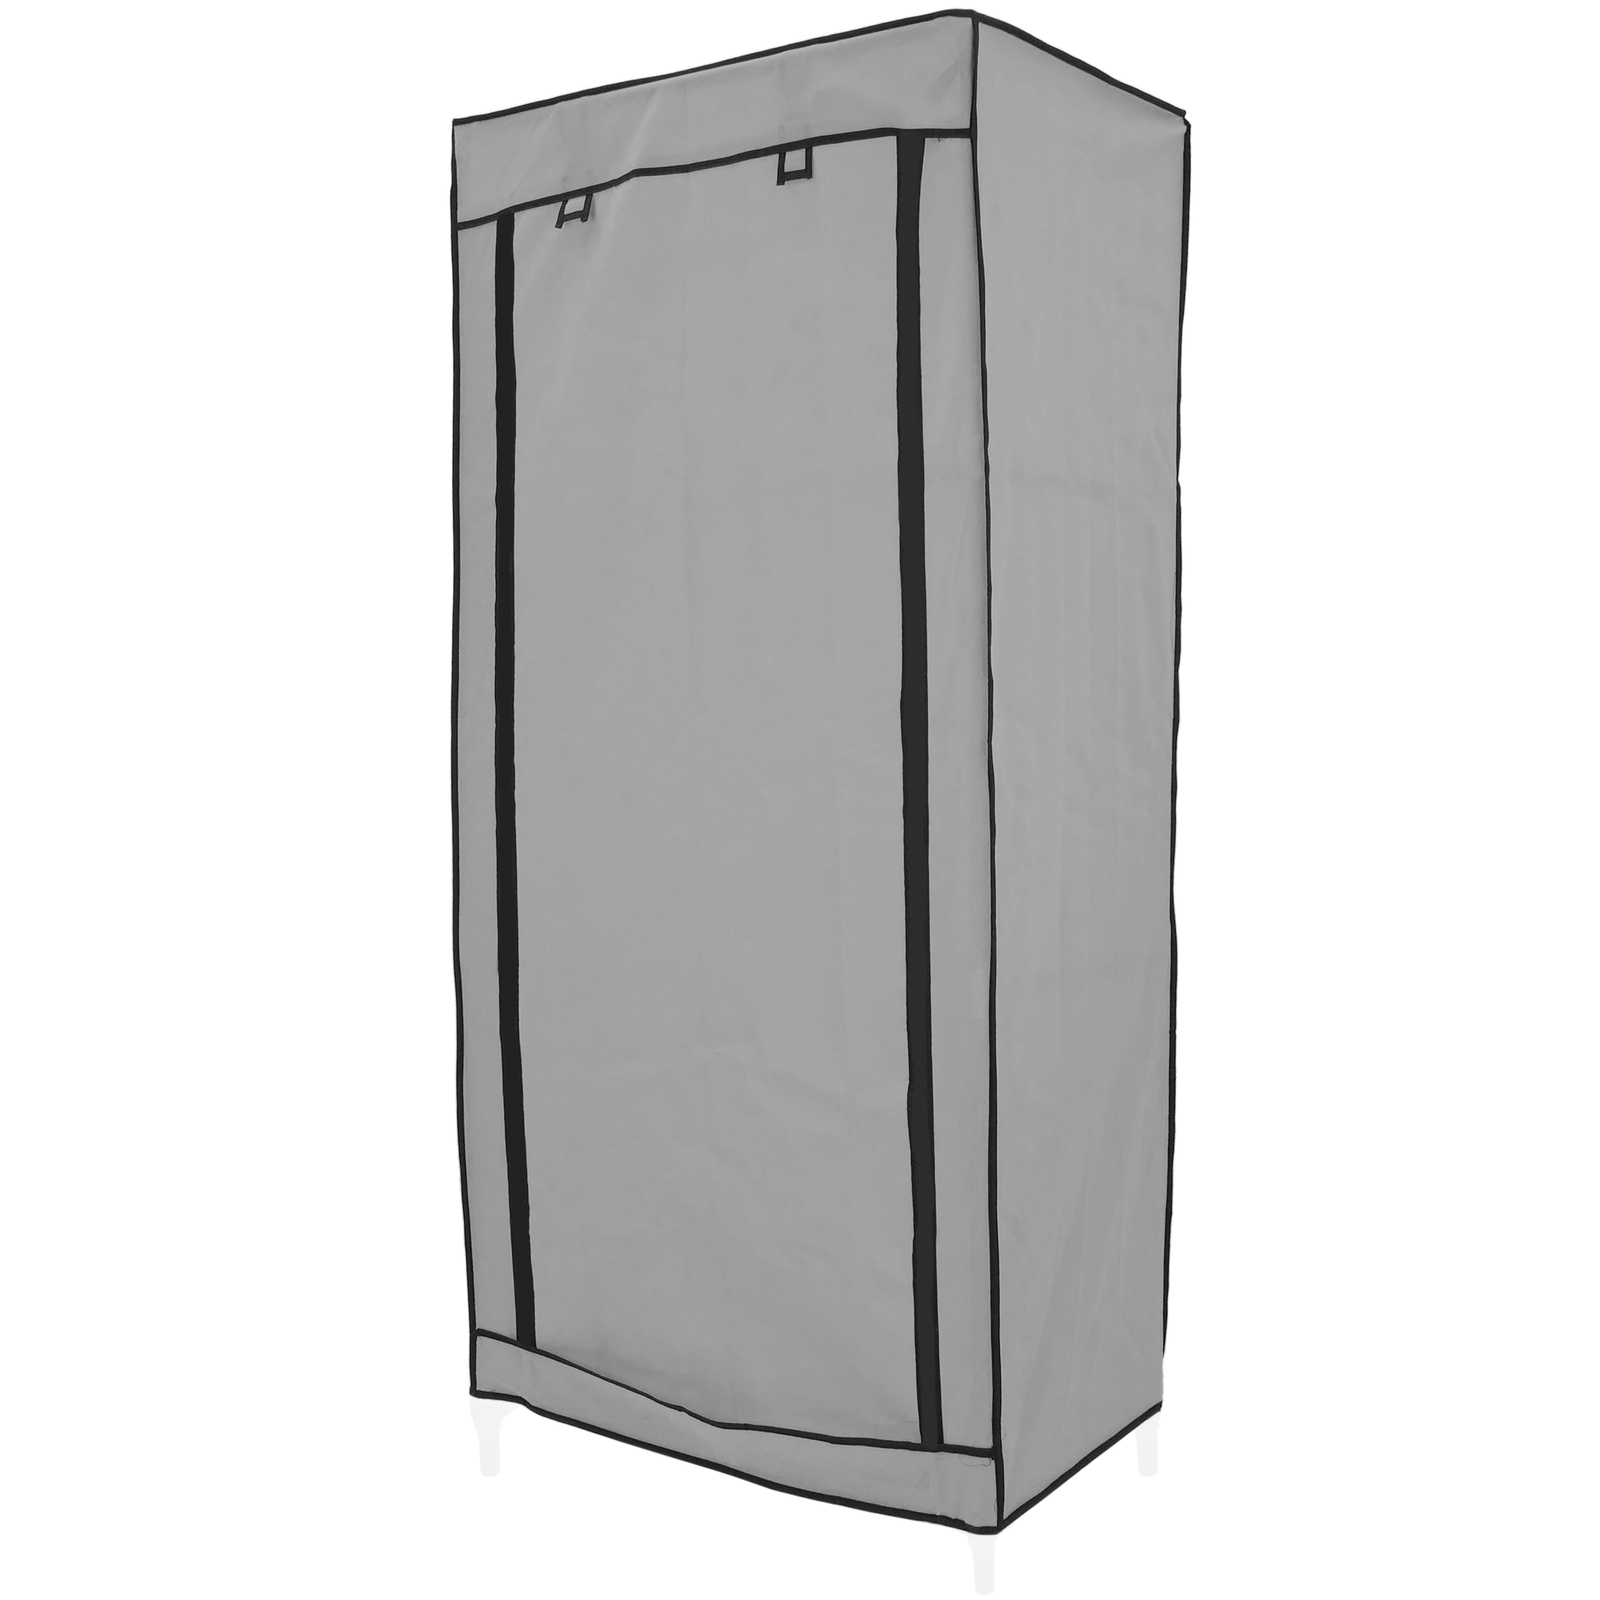 Fabric wardrobe for clothes storage and organiser 70 x 45 x 155 cm gray  with roll-up door - Cablematic